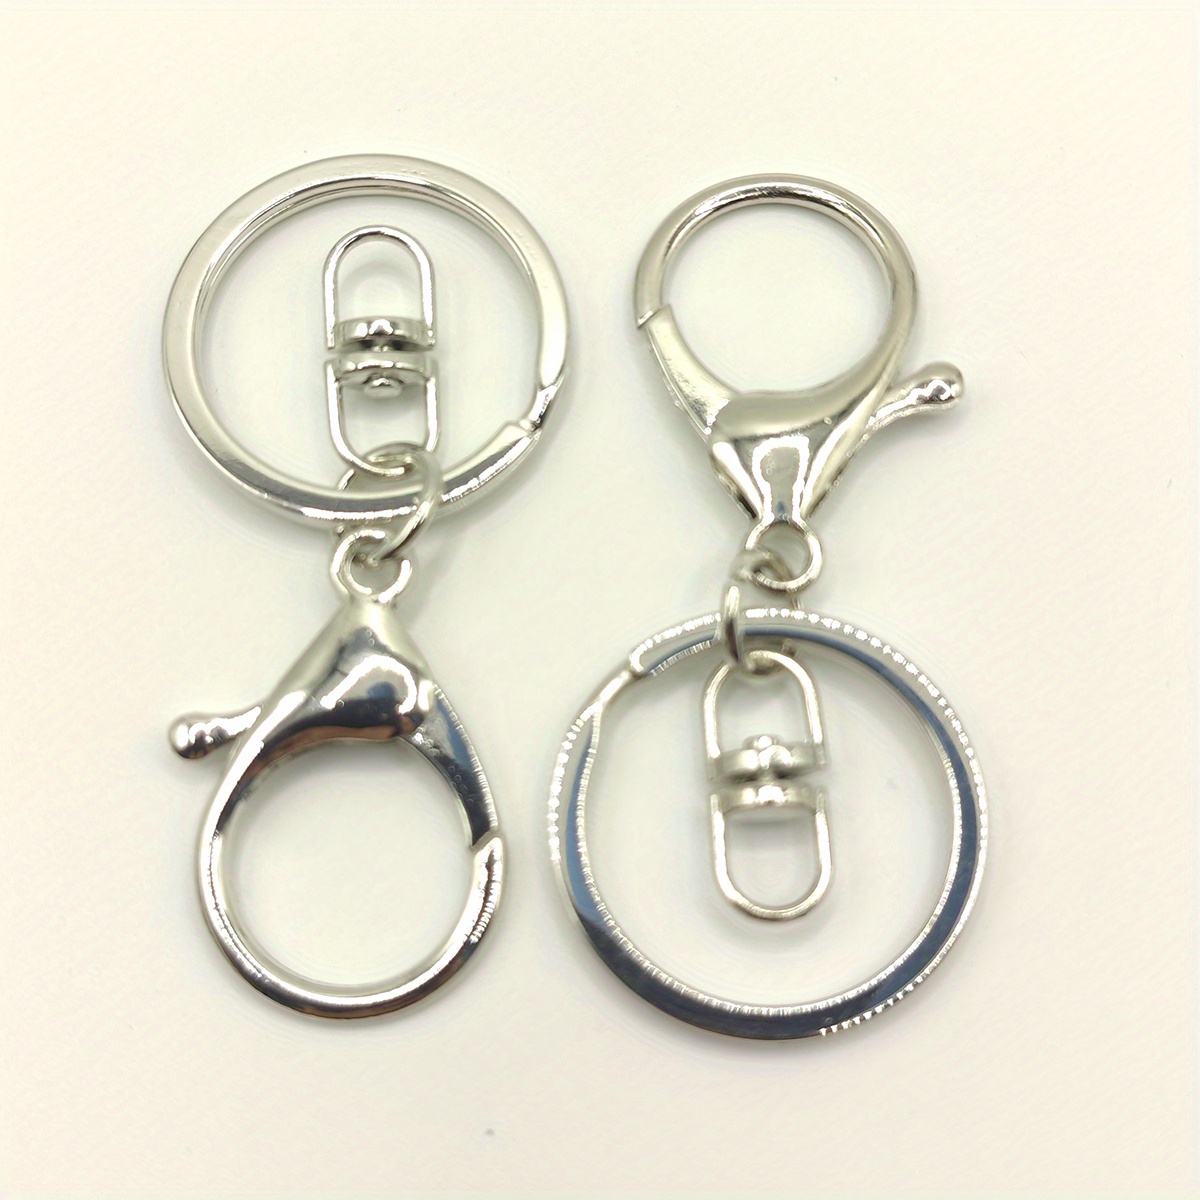 hook key chain, hook key chain Suppliers and Manufacturers at